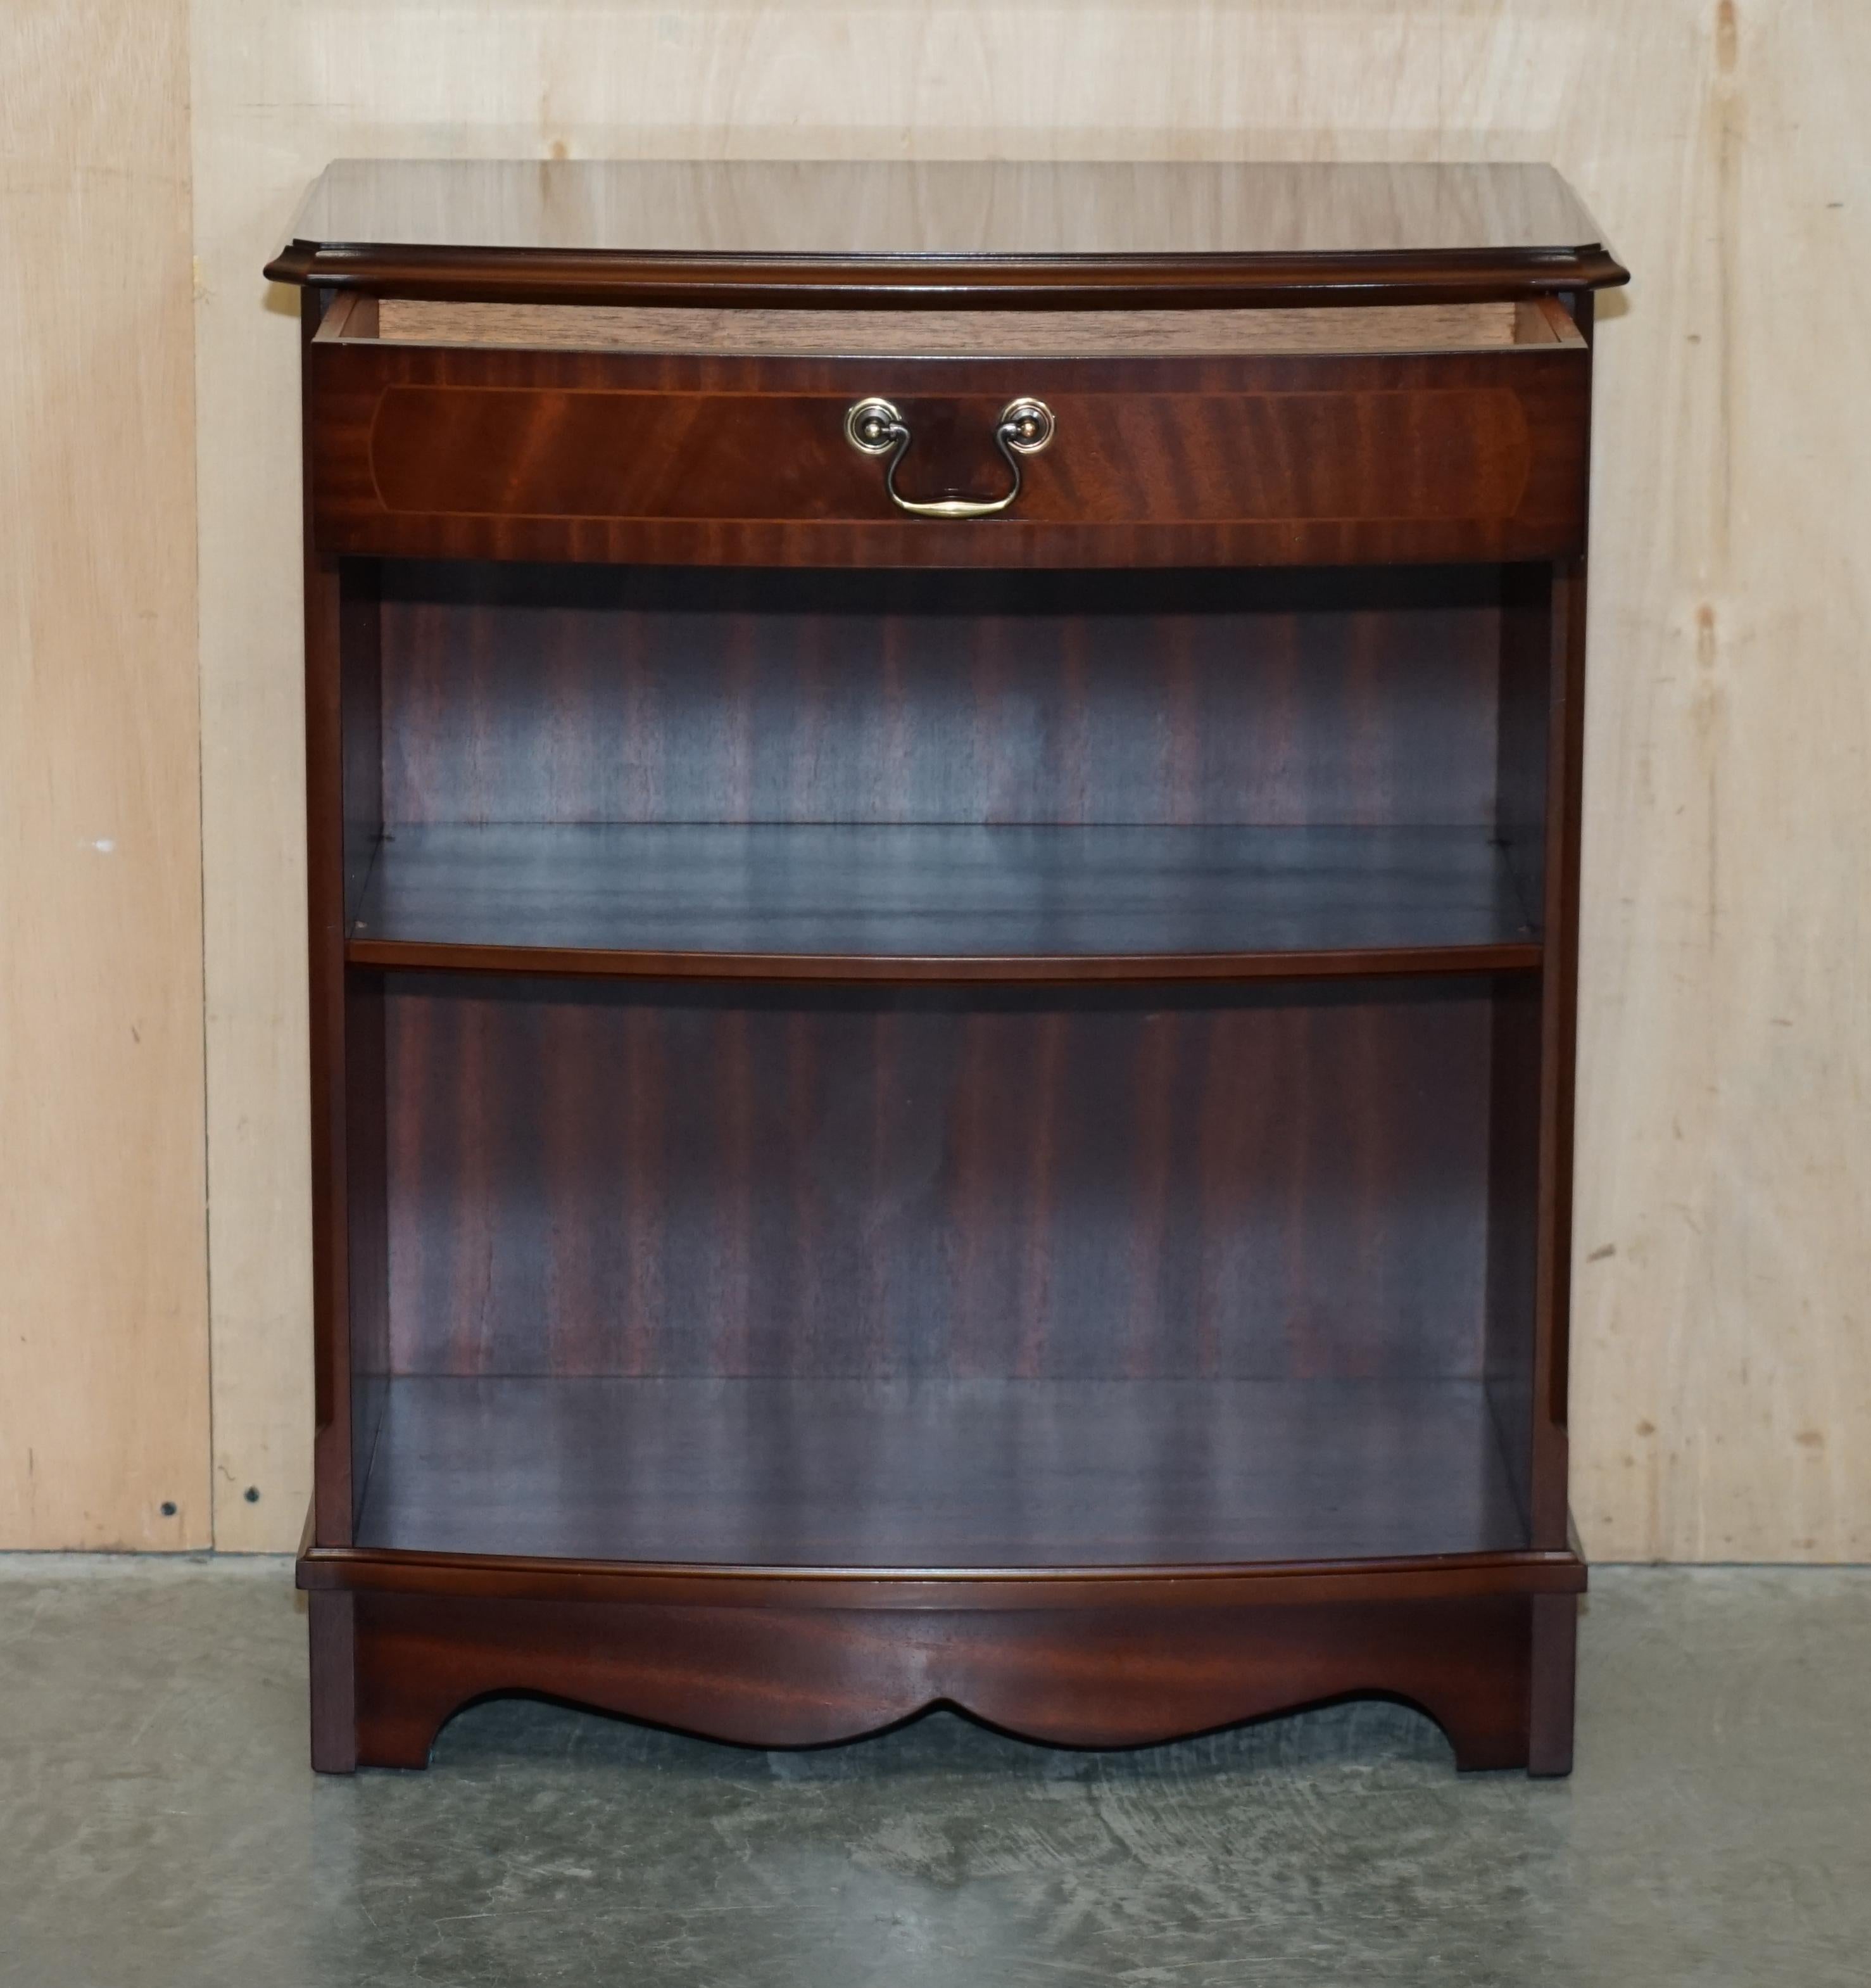 LOVELY FLAMED HARDWOOD BOW FRONTED DWARF OPEN LiBRARY BOOKCASE SINGLE DRAWER im Angebot 10